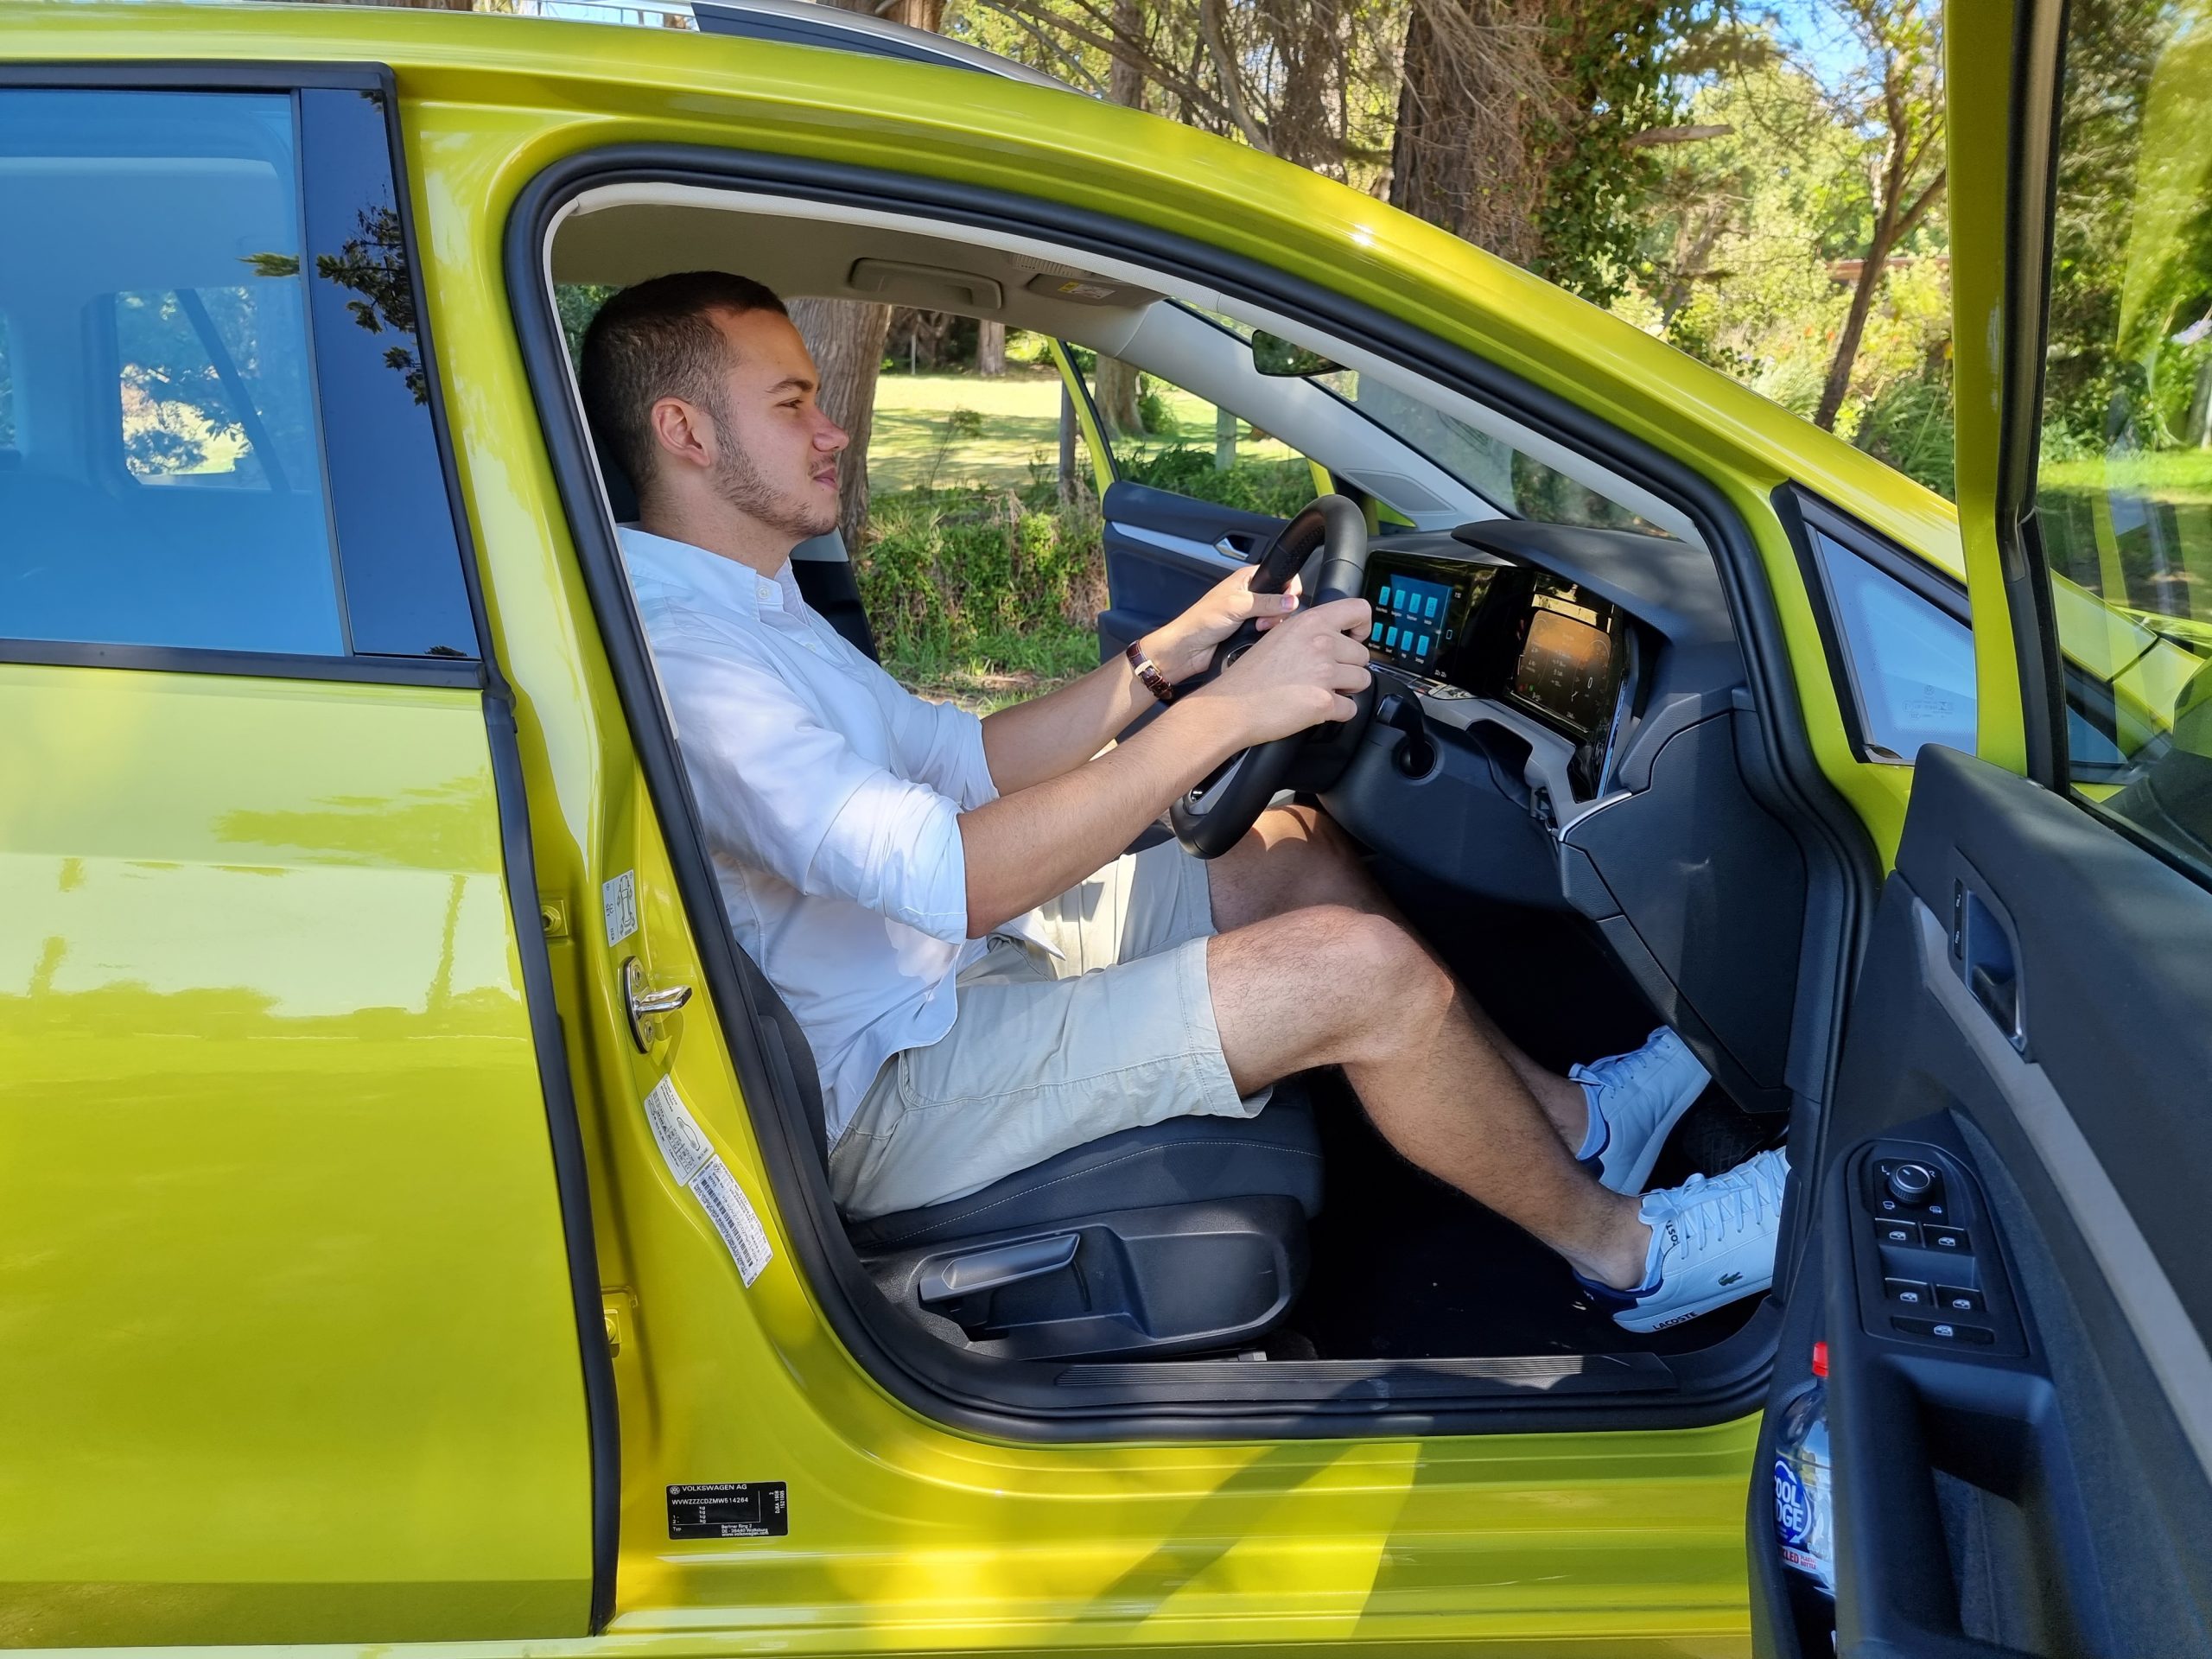 2022 VW Golf Wagon front seating position